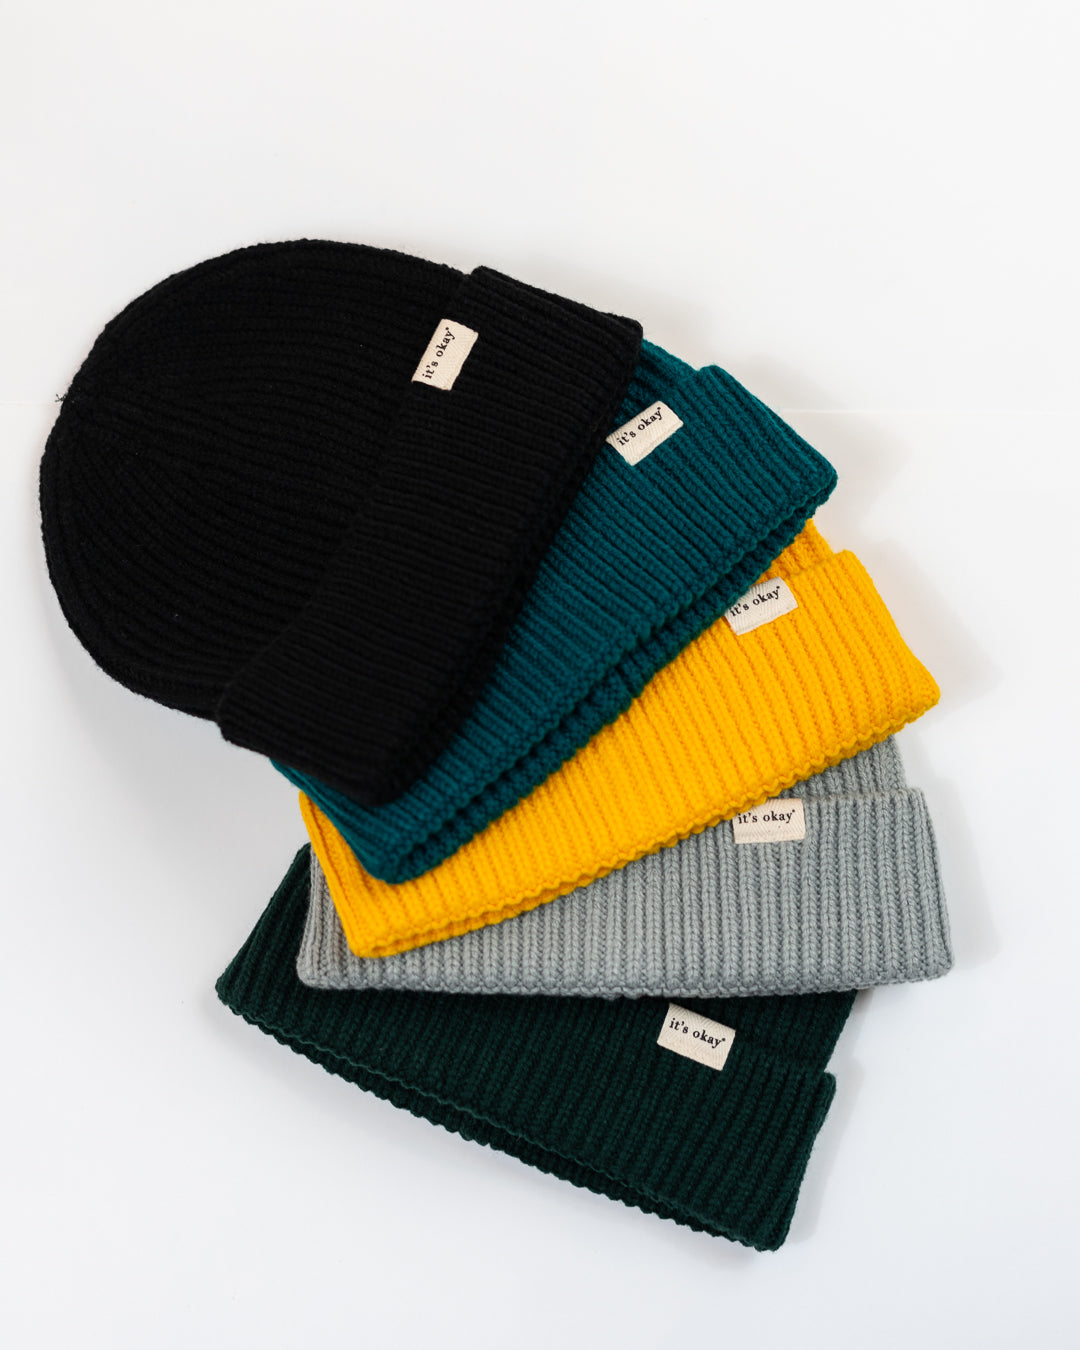 Kind beanie - treat yourself with kindness. Gender neutral, multiple colors, hidden message inside. Join our movement: it's okay to be exactly who you are. Pt. Novos gorros it's okay, várias cores, com uma mensagem interior. Junta-te ao movimento it's okay!